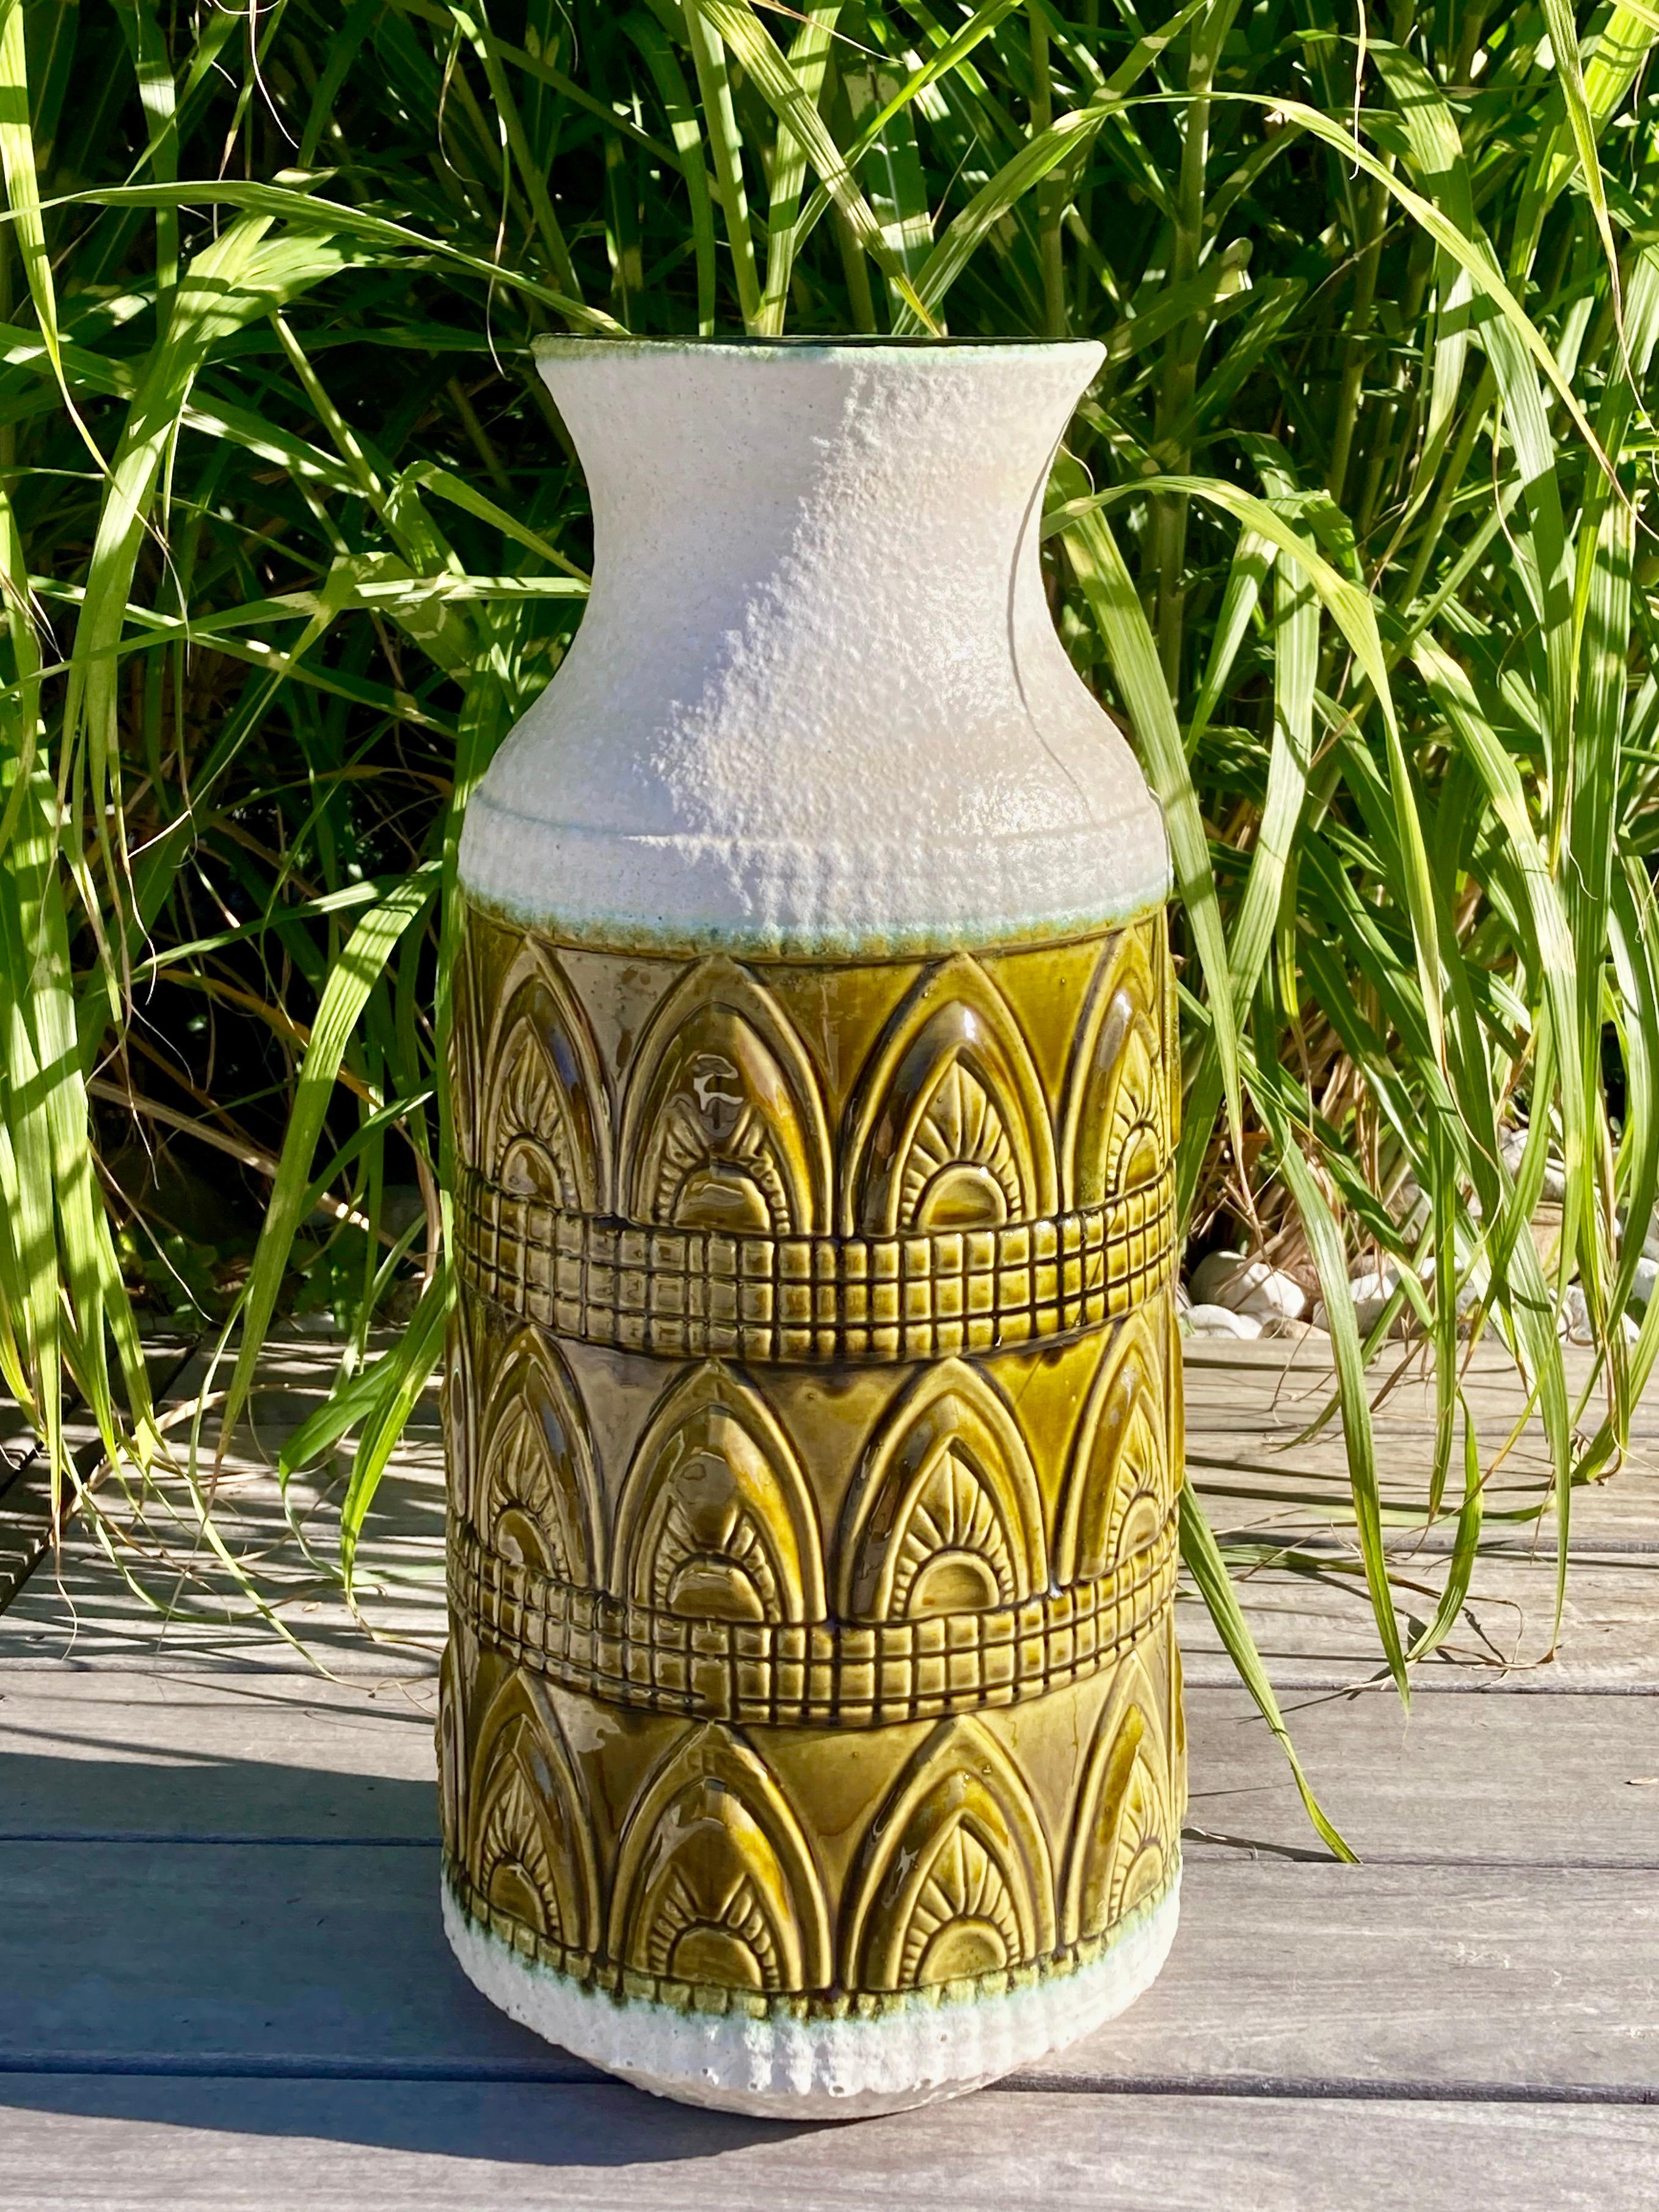 An amazing and very sought after mid-century modern 1960s fat lava floor vase by the renowned West German pottery maker Üebelacker, also called Ü-Keramik. The company was founded in 1909 by Johann Üebelacker and until its end in 1990, it was famous